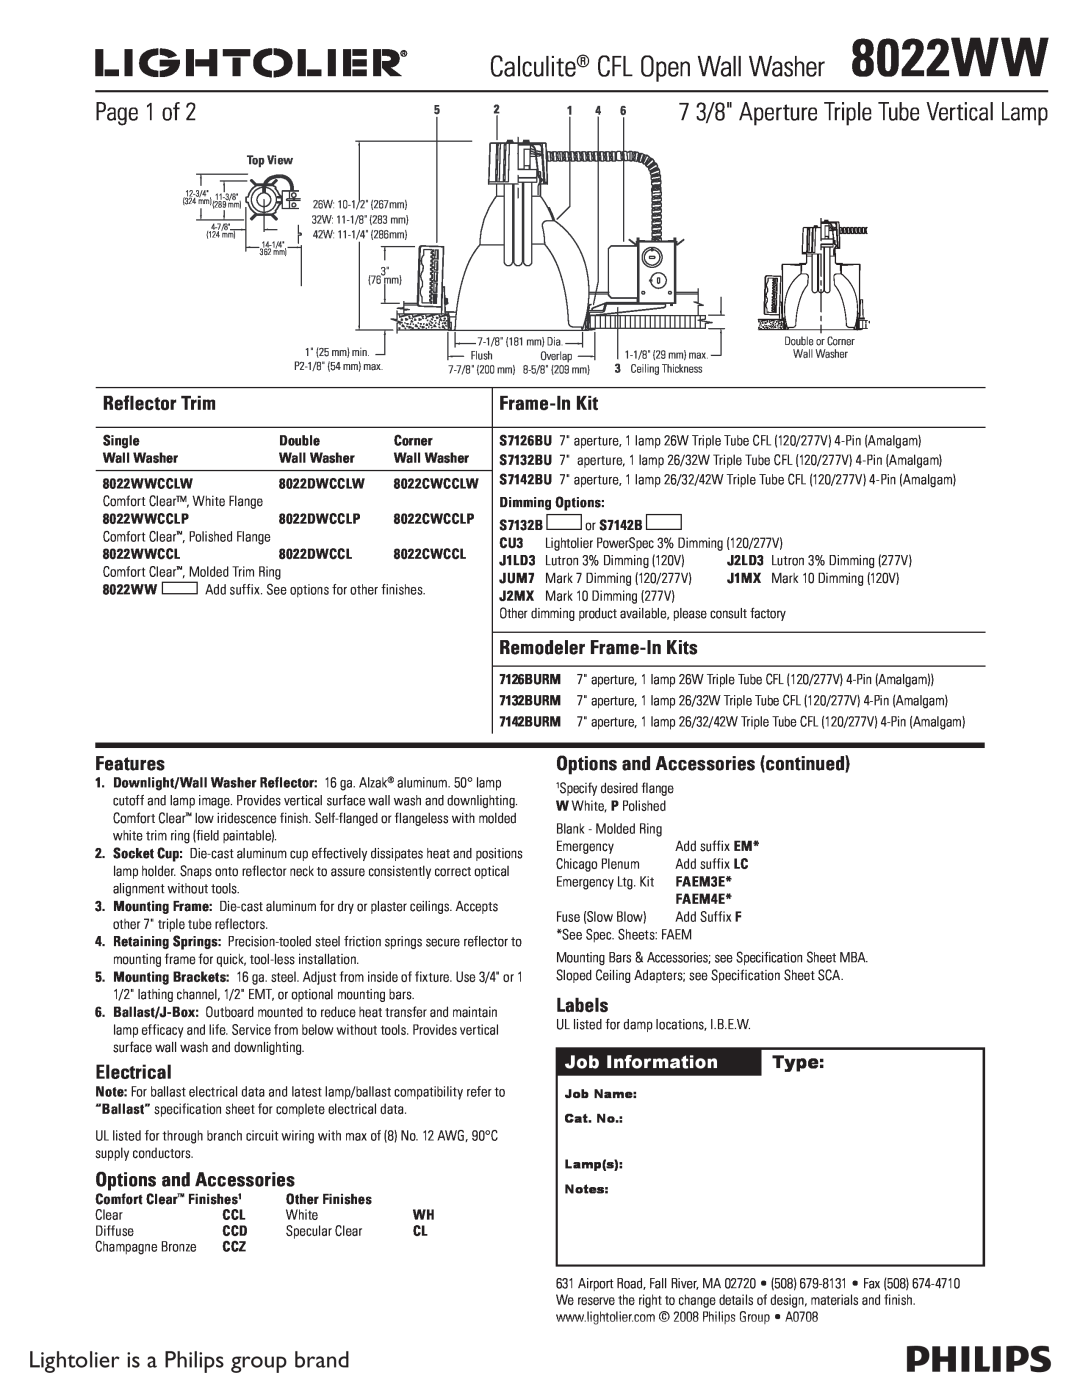 Lightolier specifications Page 1 of, Lightolier is a Philips group brand, Calculite CFL Open Wall Washer8022WW, Labels 